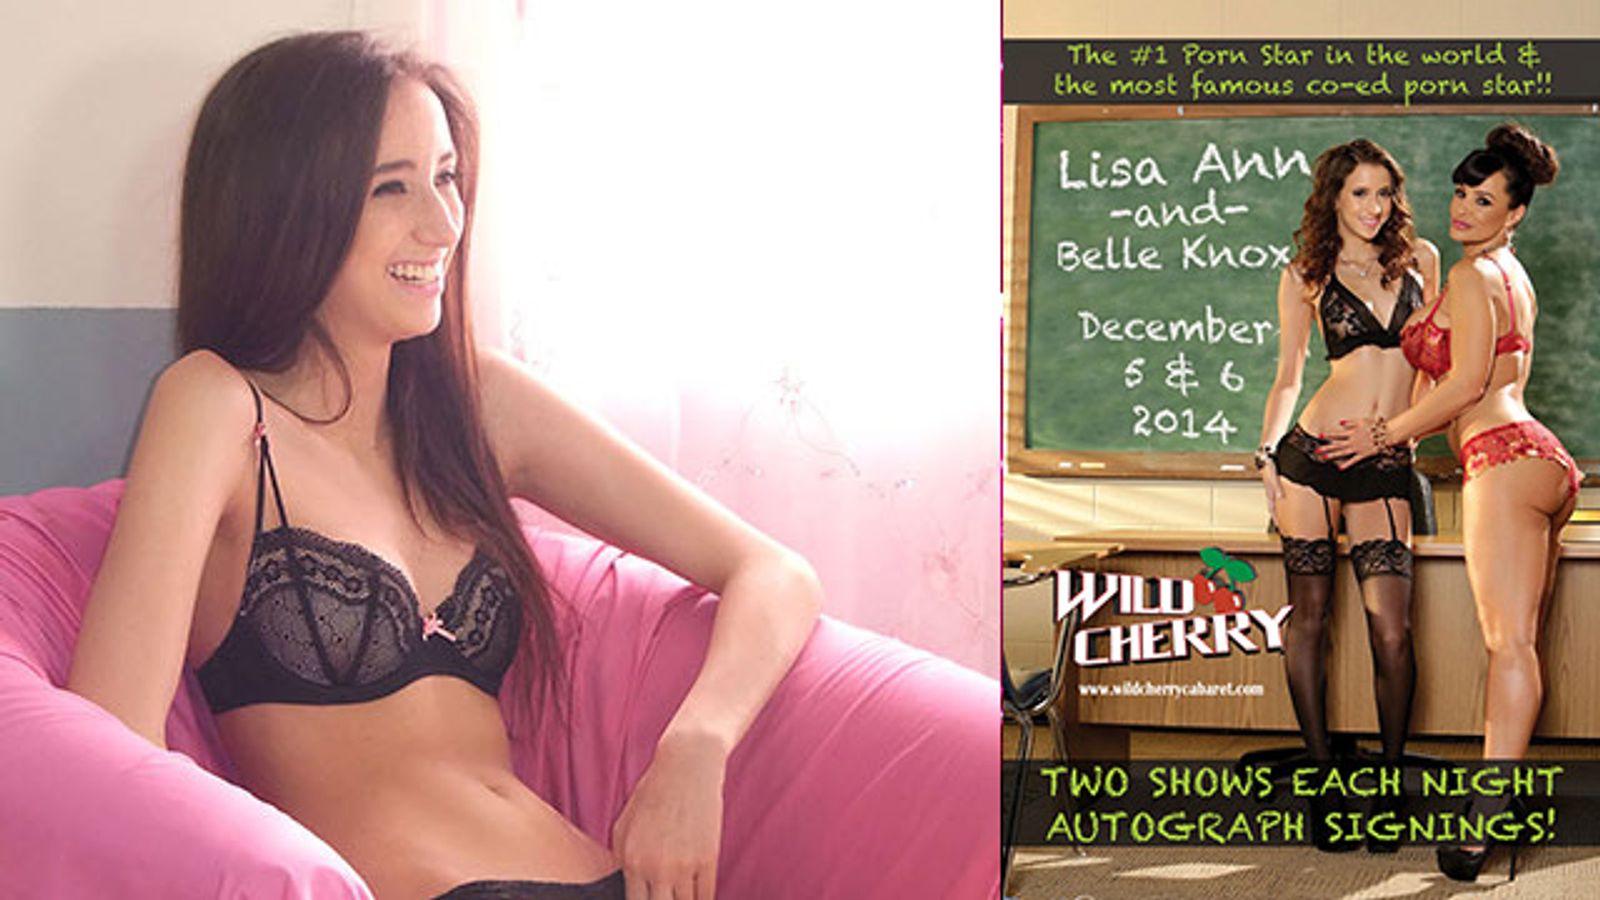 Belle Knox, Lisa Ann to Appear at Wild Cherry Cabaret Dec. 5 & 6